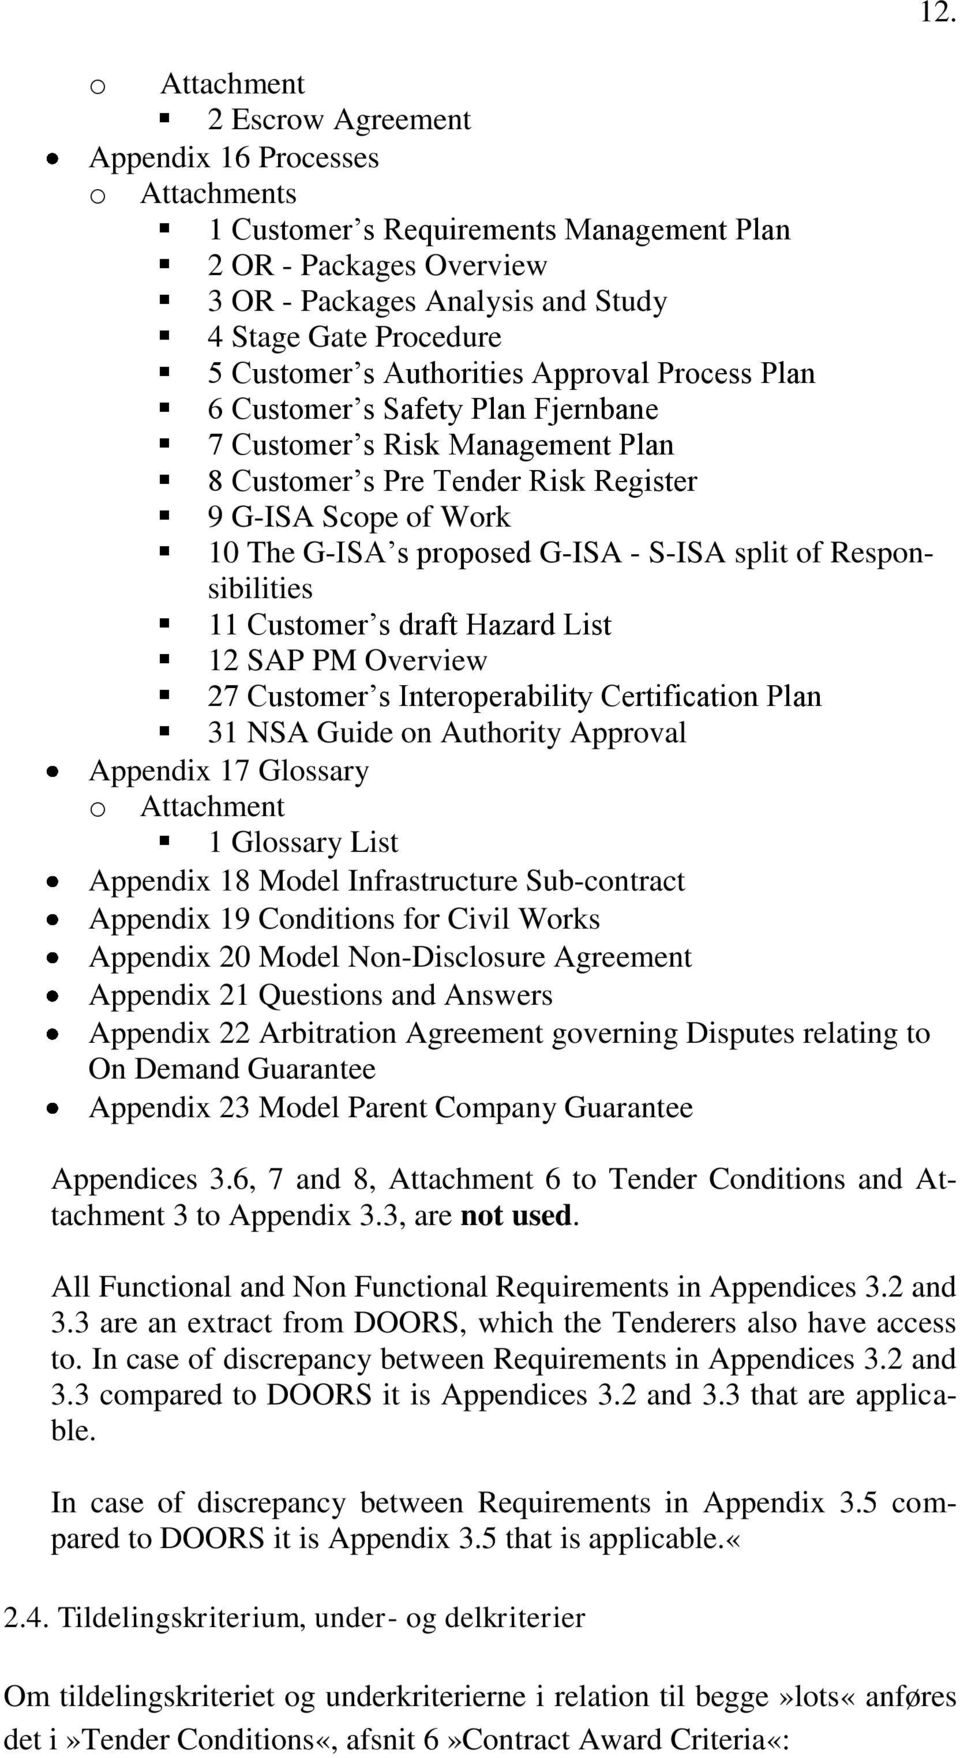 G-ISA - S-ISA split of Responsibilities 11 Customer s draft Hazard List 12 SAP PM Overview 27 Customer s Interoperability Certification Plan 31 NSA Guide on Authority Approval Appendix 17 Glossary o